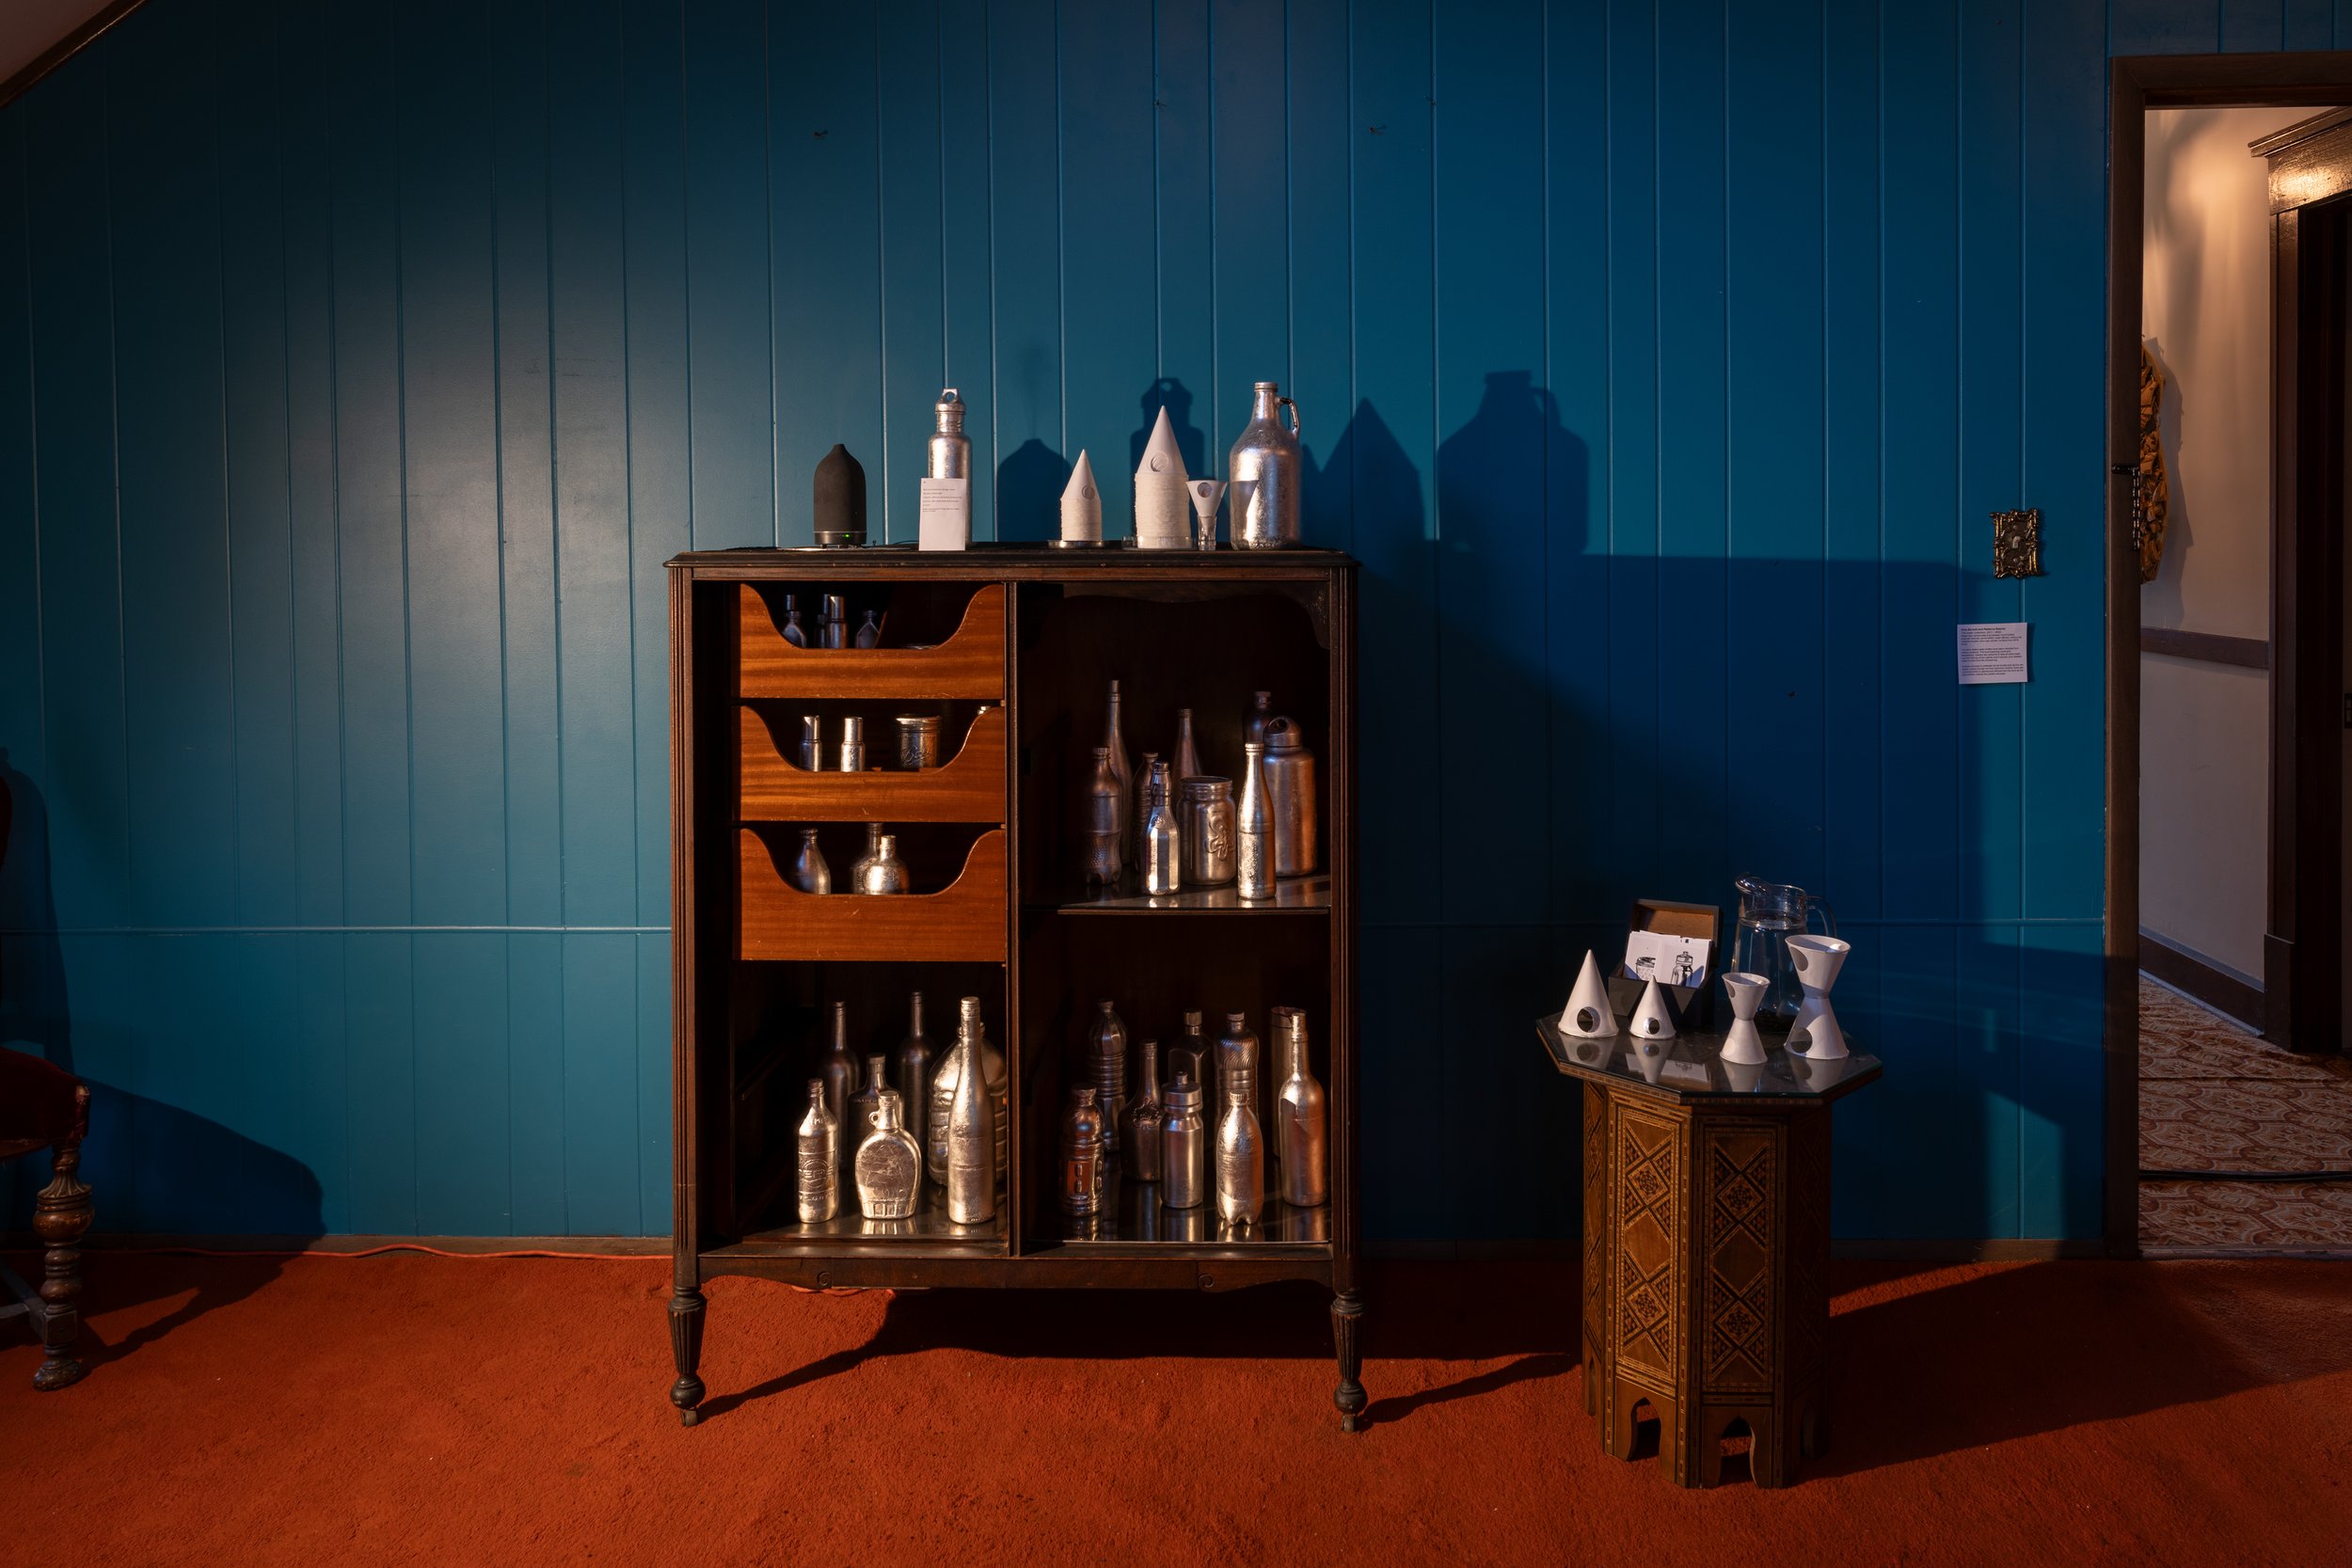  Nina Barnett and Rebecca Beachy –  The water collection , 2011 / 2023 – photography by Nathan Keay 